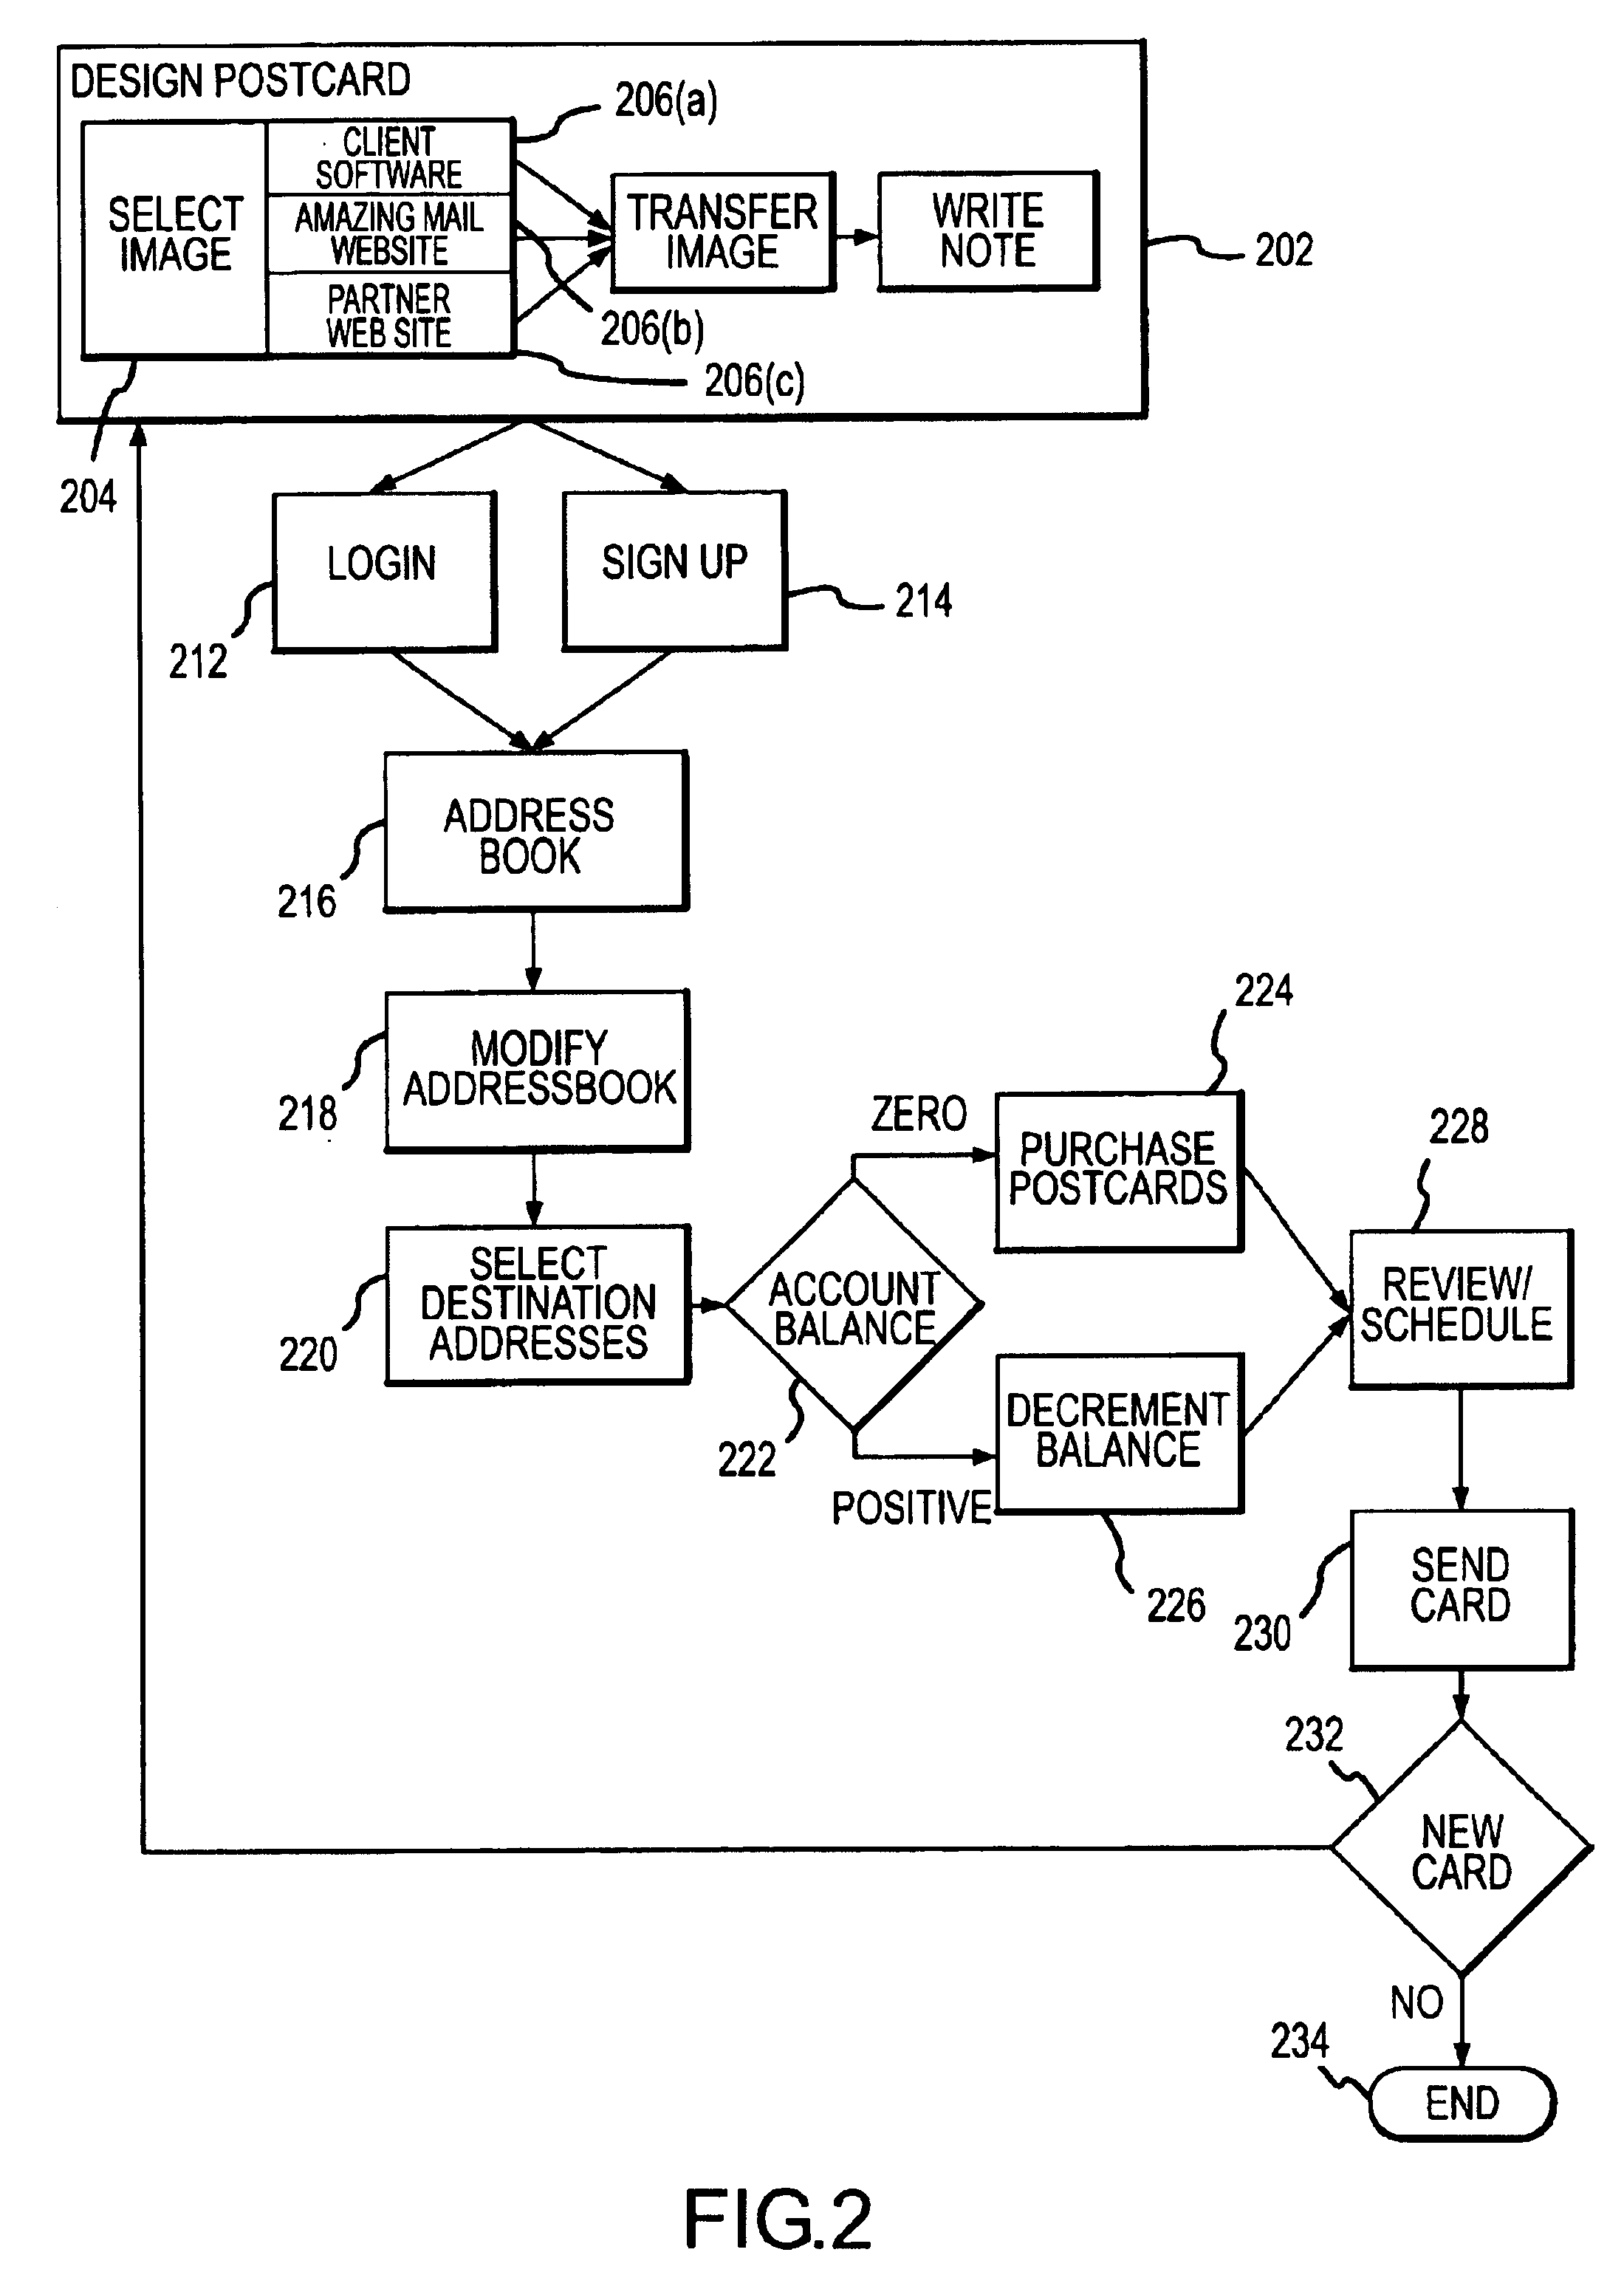 Methods and apparatus for generation and distribution of surface mail objects